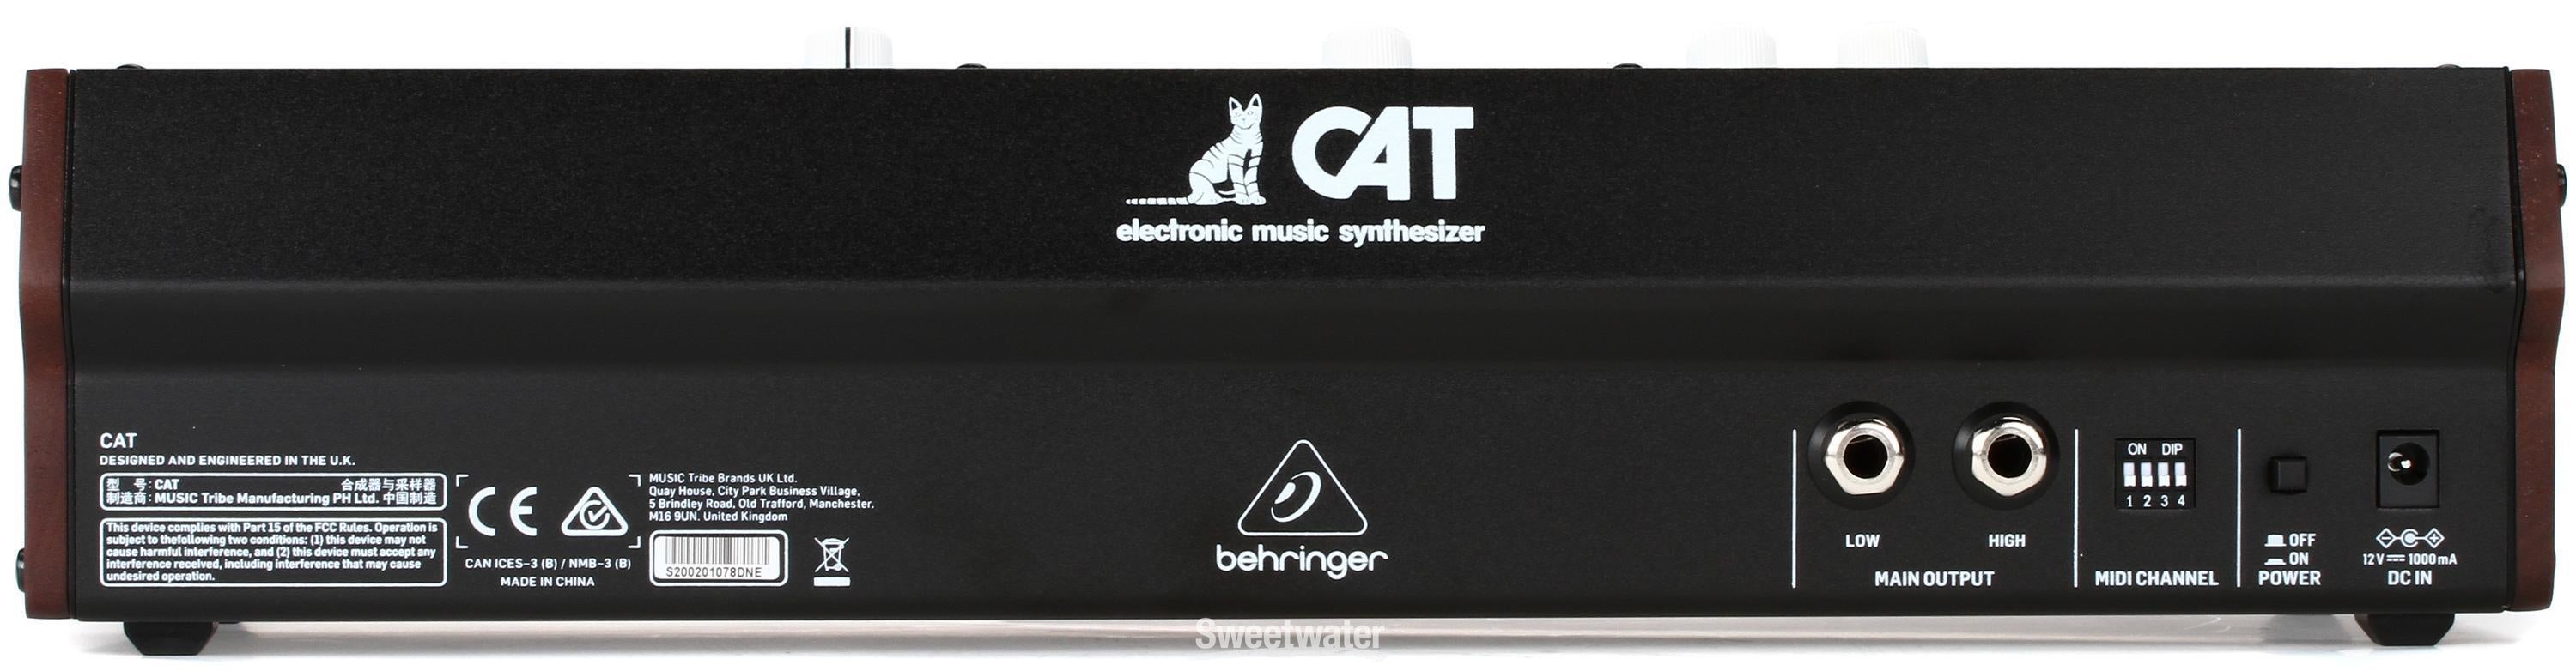 Behringer CAT Desktop Duophonic Analog Synthesizer Module | Sweetwater